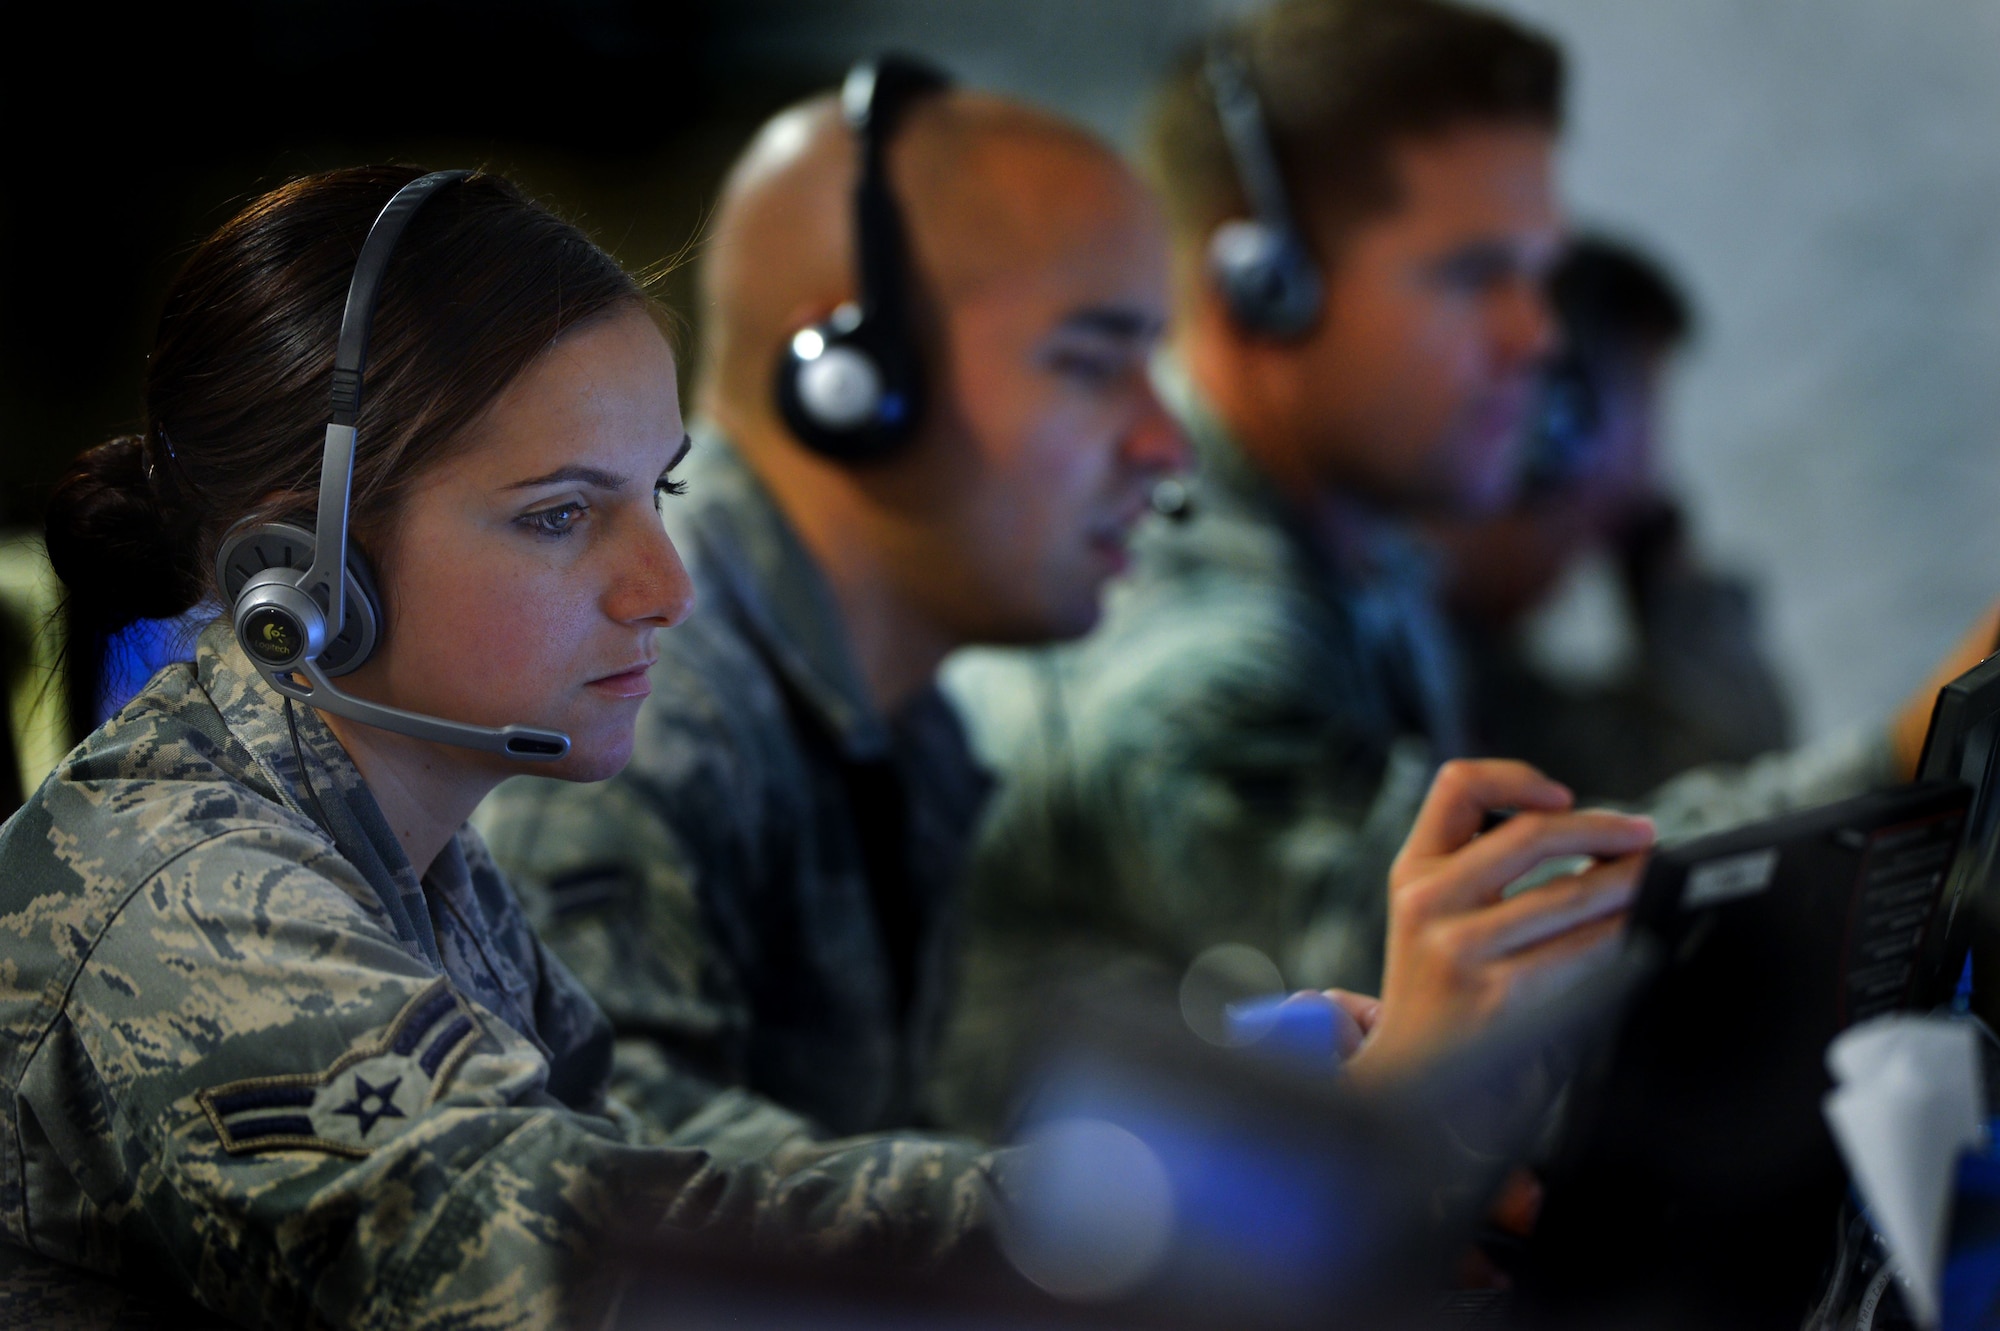 U.S. Air Force Airman 1st Class Lizandra Montero, 337th Air Control Squadron pilot simulator, controls threat scenarios projected to a training audience of U.S. military and allied armed forces members during Exercise Eagle Resolve 2013 in the Regional Air Operations Center in Doha, Qatar, April 24. When the 33rd Fighter Wing acquired it's current training mission under Air Education and Training Command it absorbed the 337 ACS, the Air Force's only Air Battle Manager school house. (U.S. Air Force photo by Kenny Holston/Released)